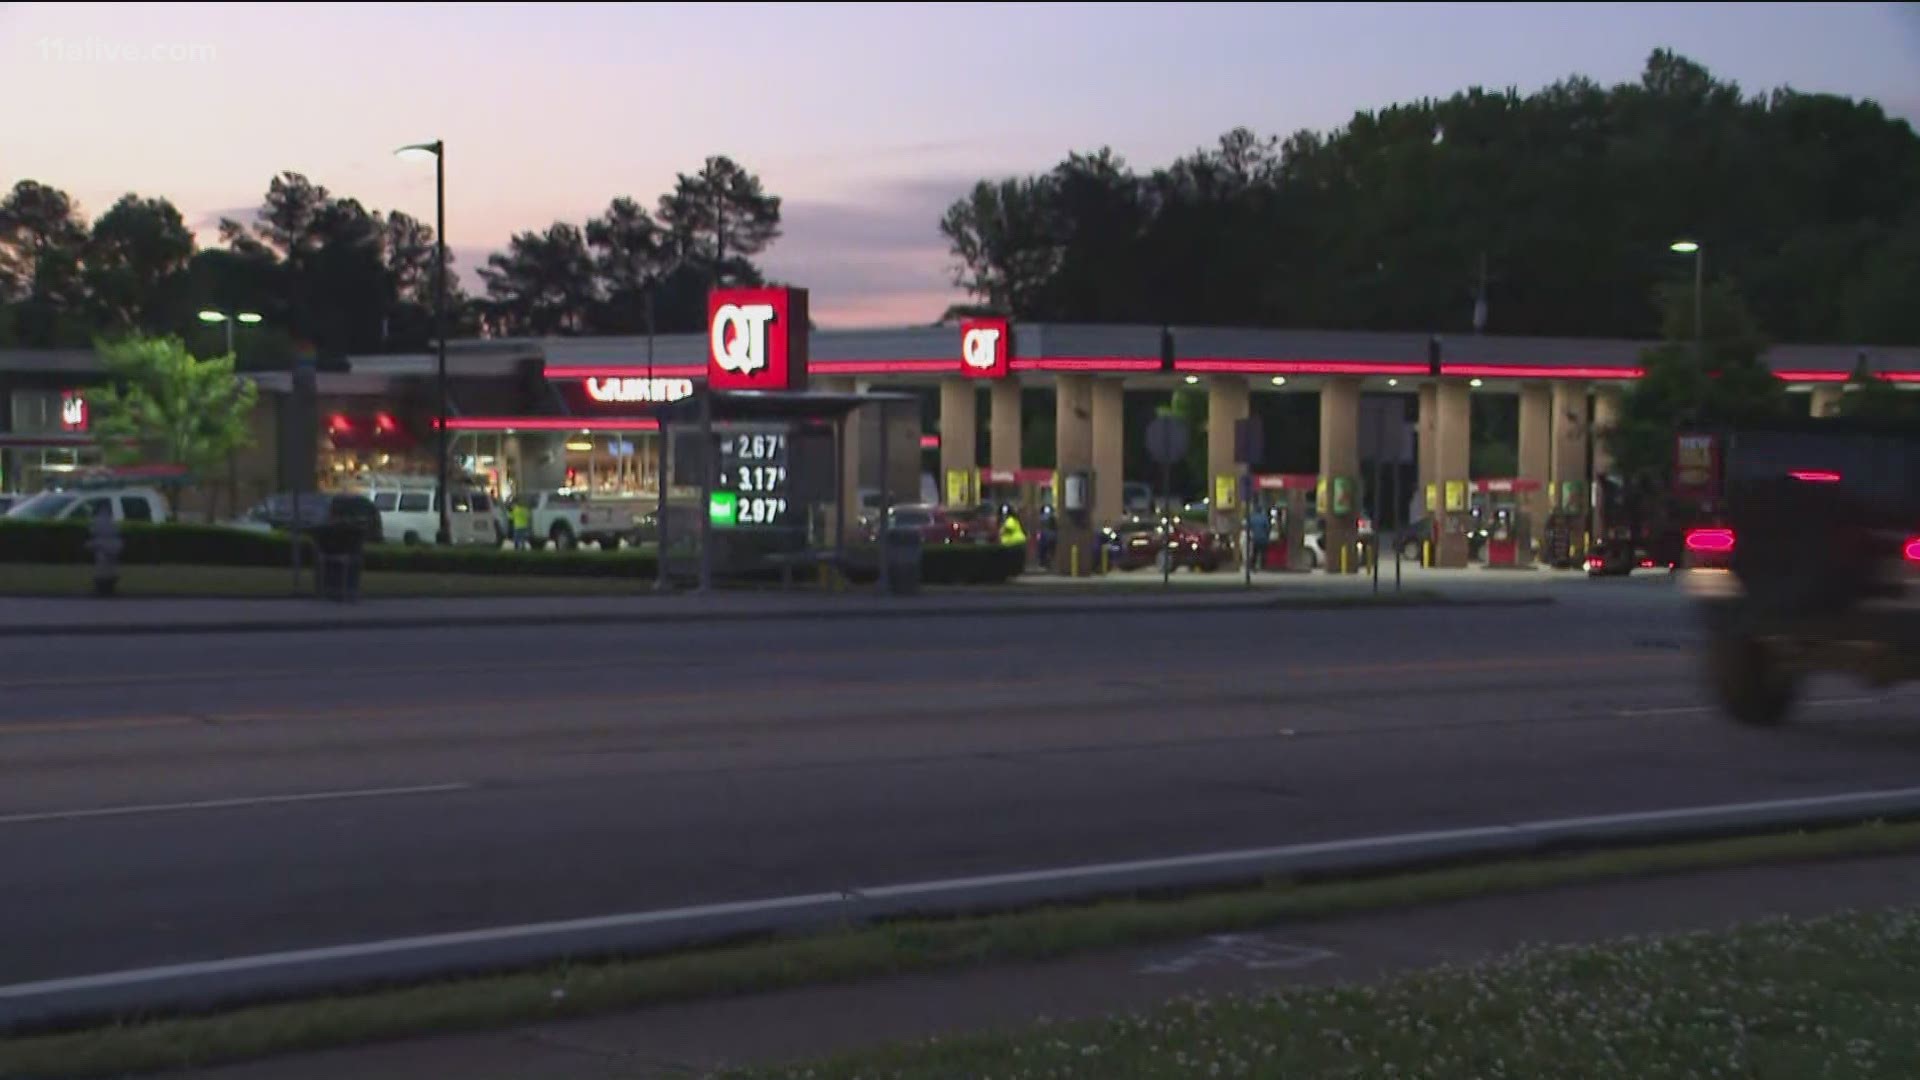 Early Friday morning, an inmate escaped from the California detectives transporting him to a prison in Georgia as they stopped at a QuikTrip for something to eat.